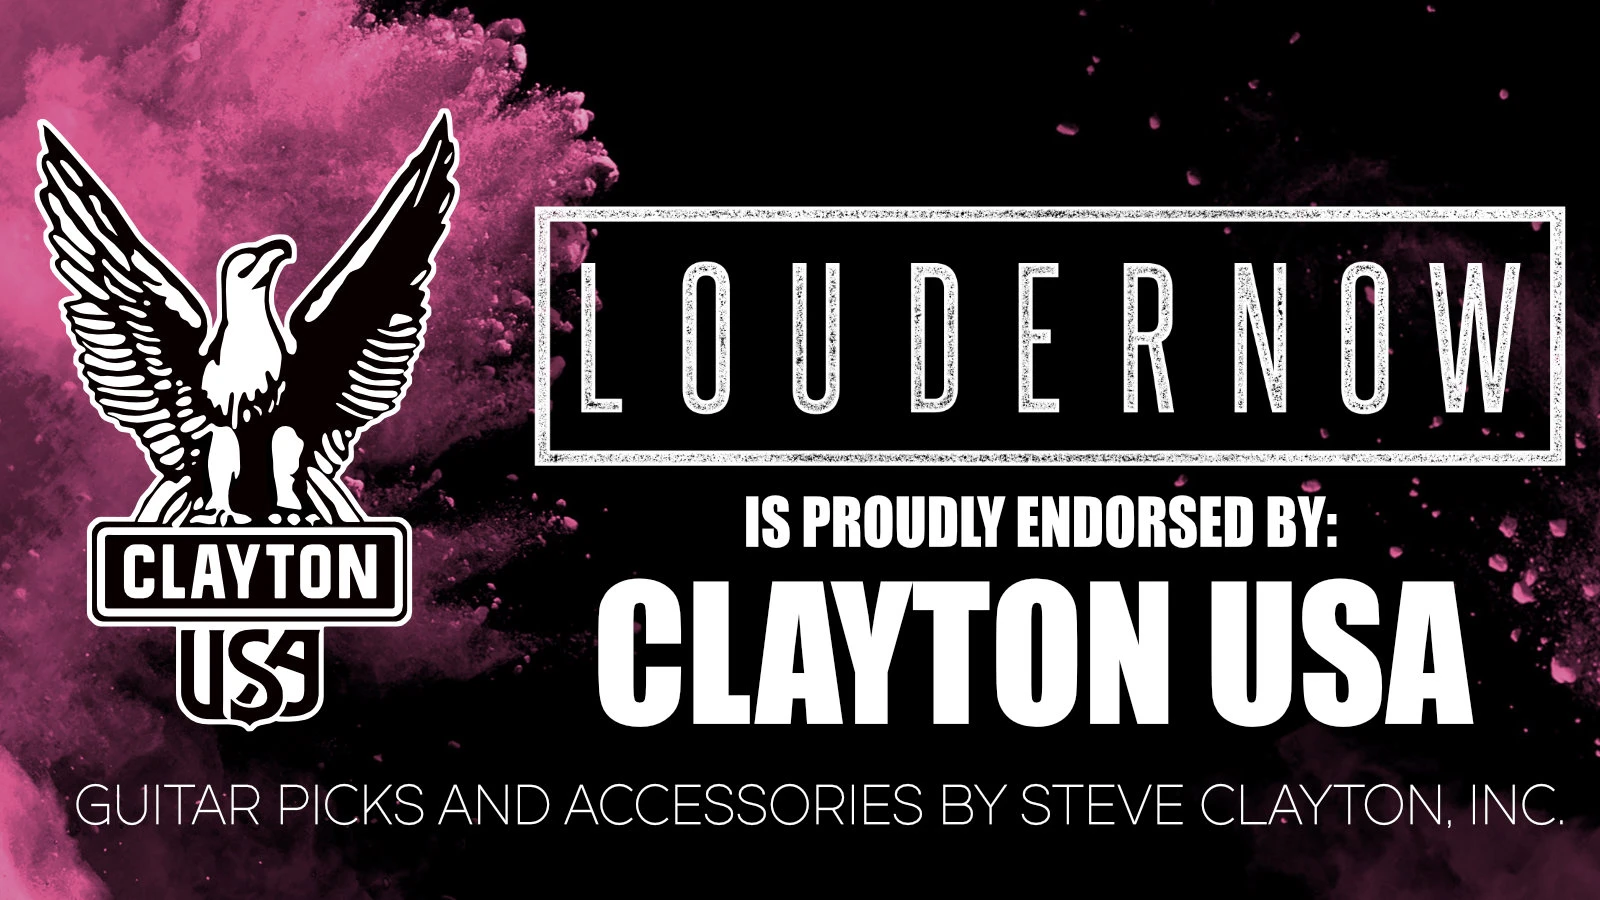 Visit Clayton USA Products